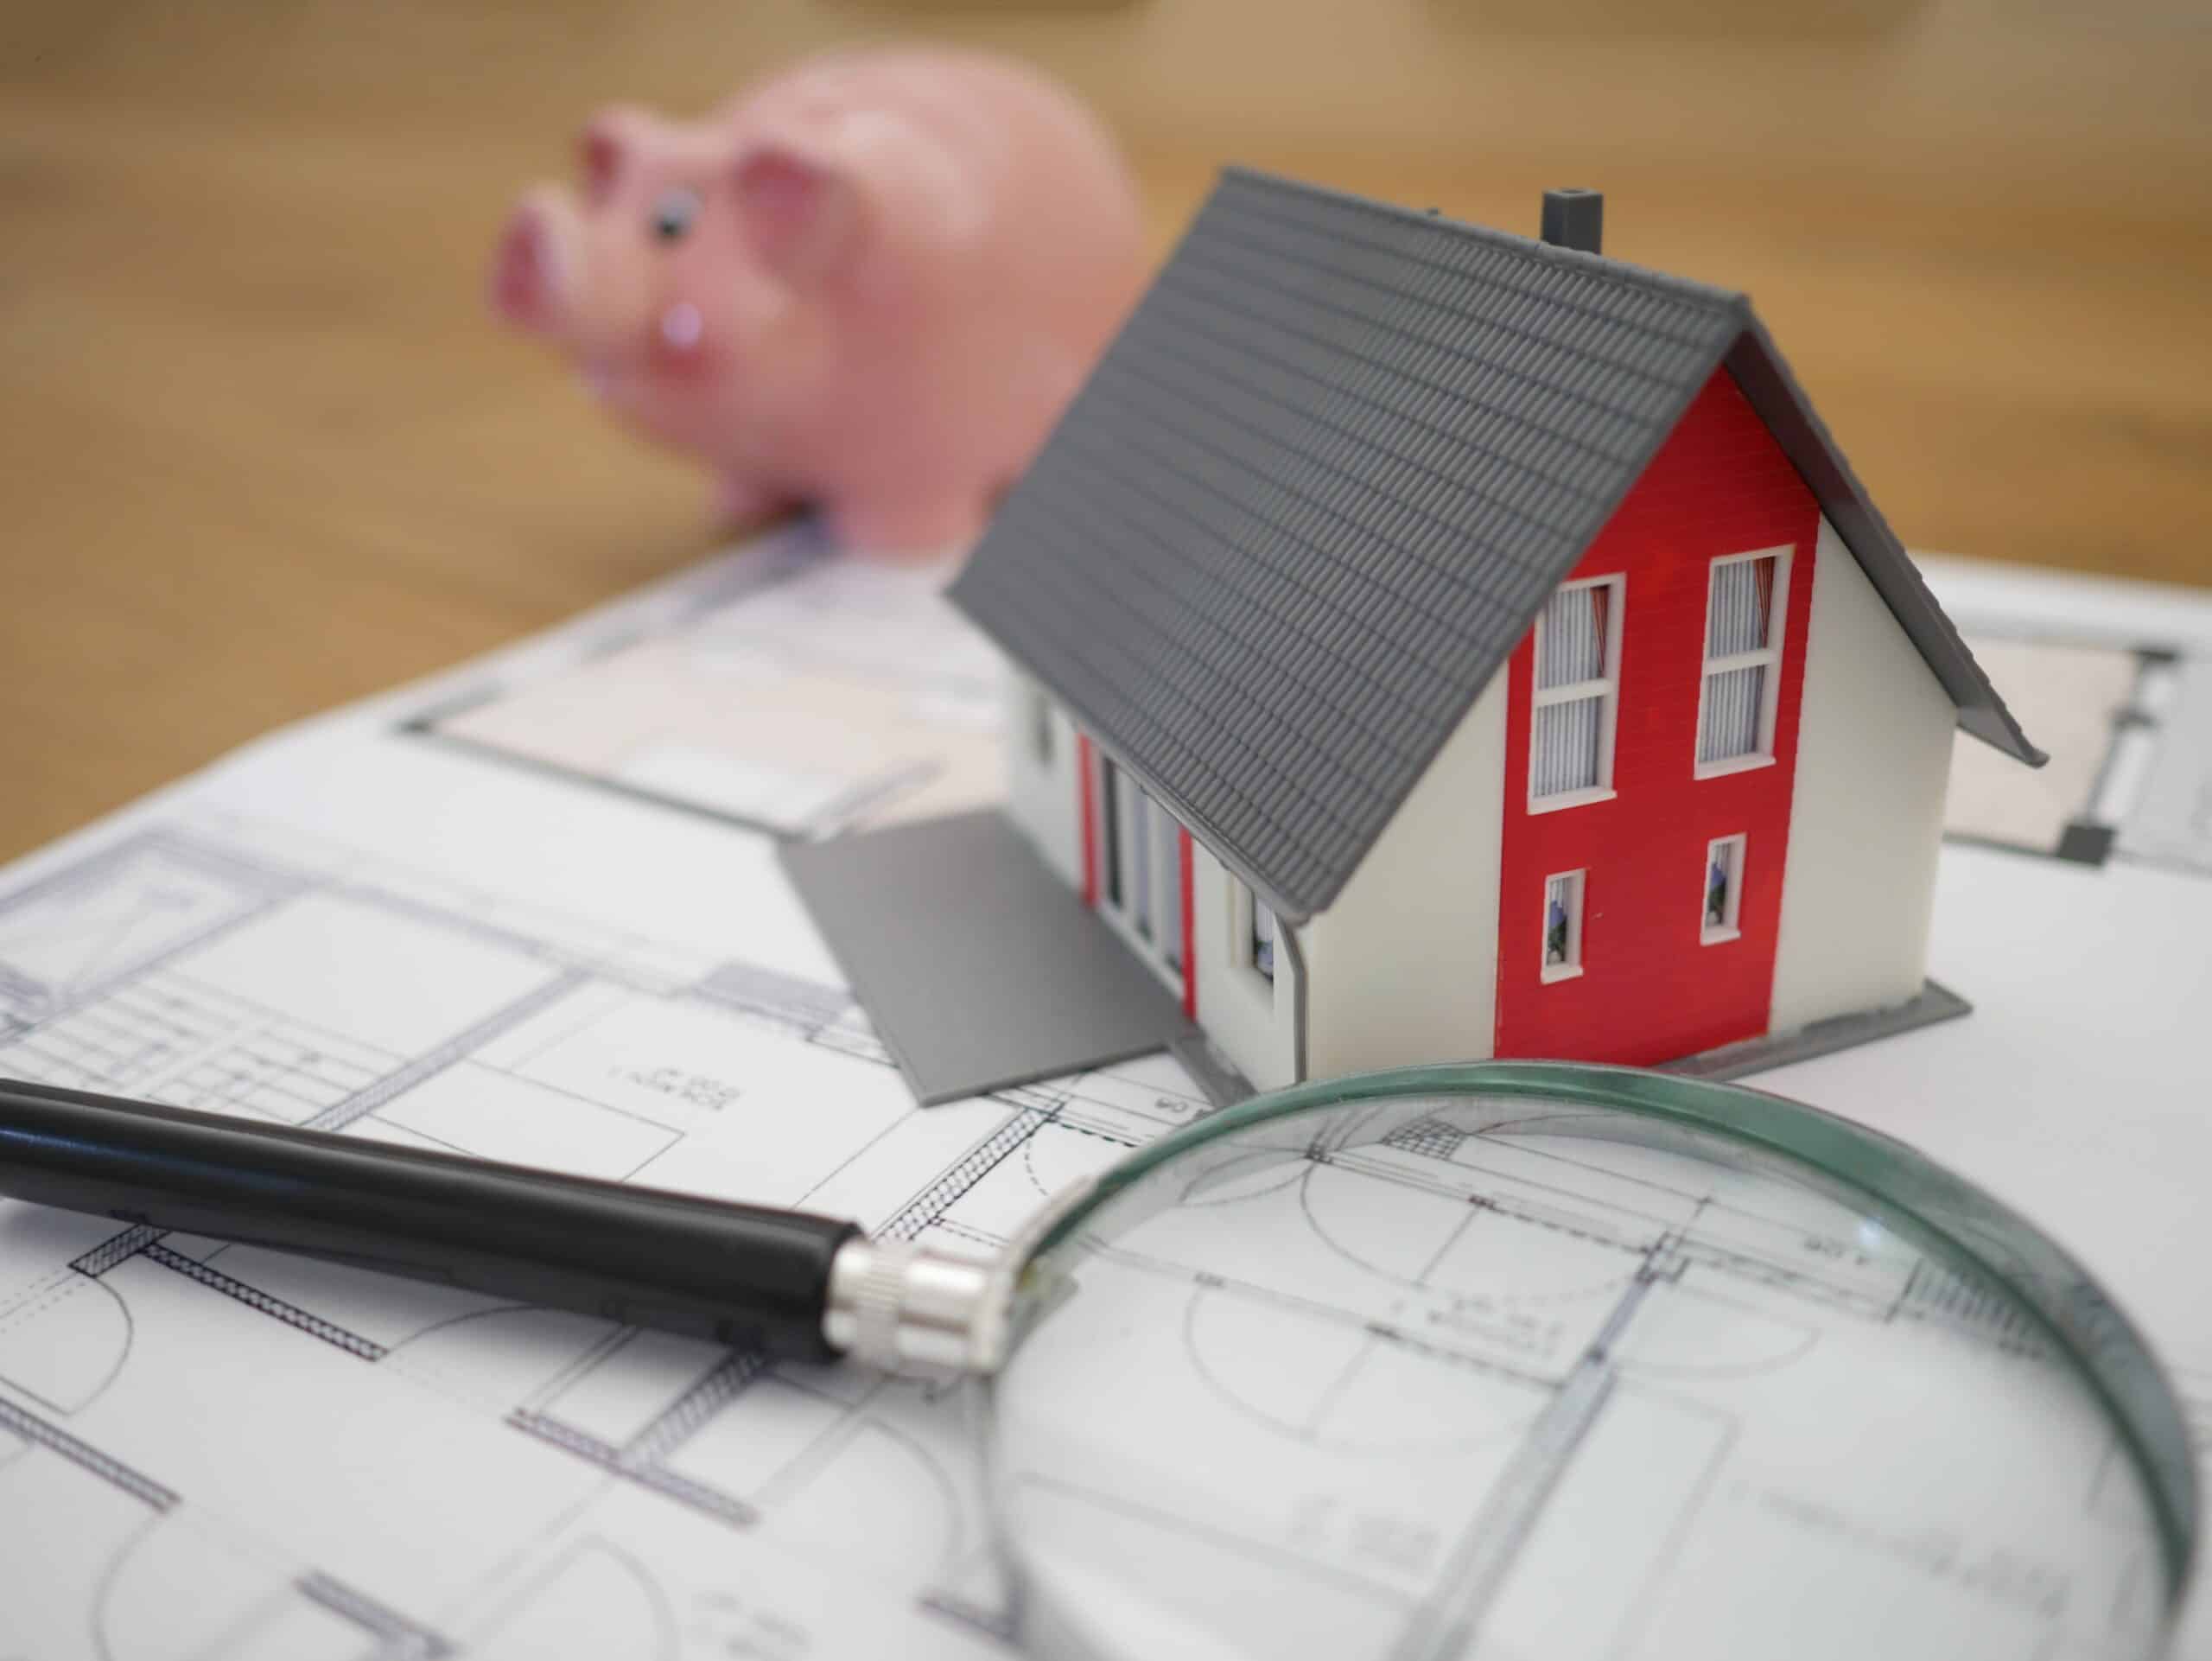 White and red wooden house beside gray framed magnifying glass in front of a piggy bank